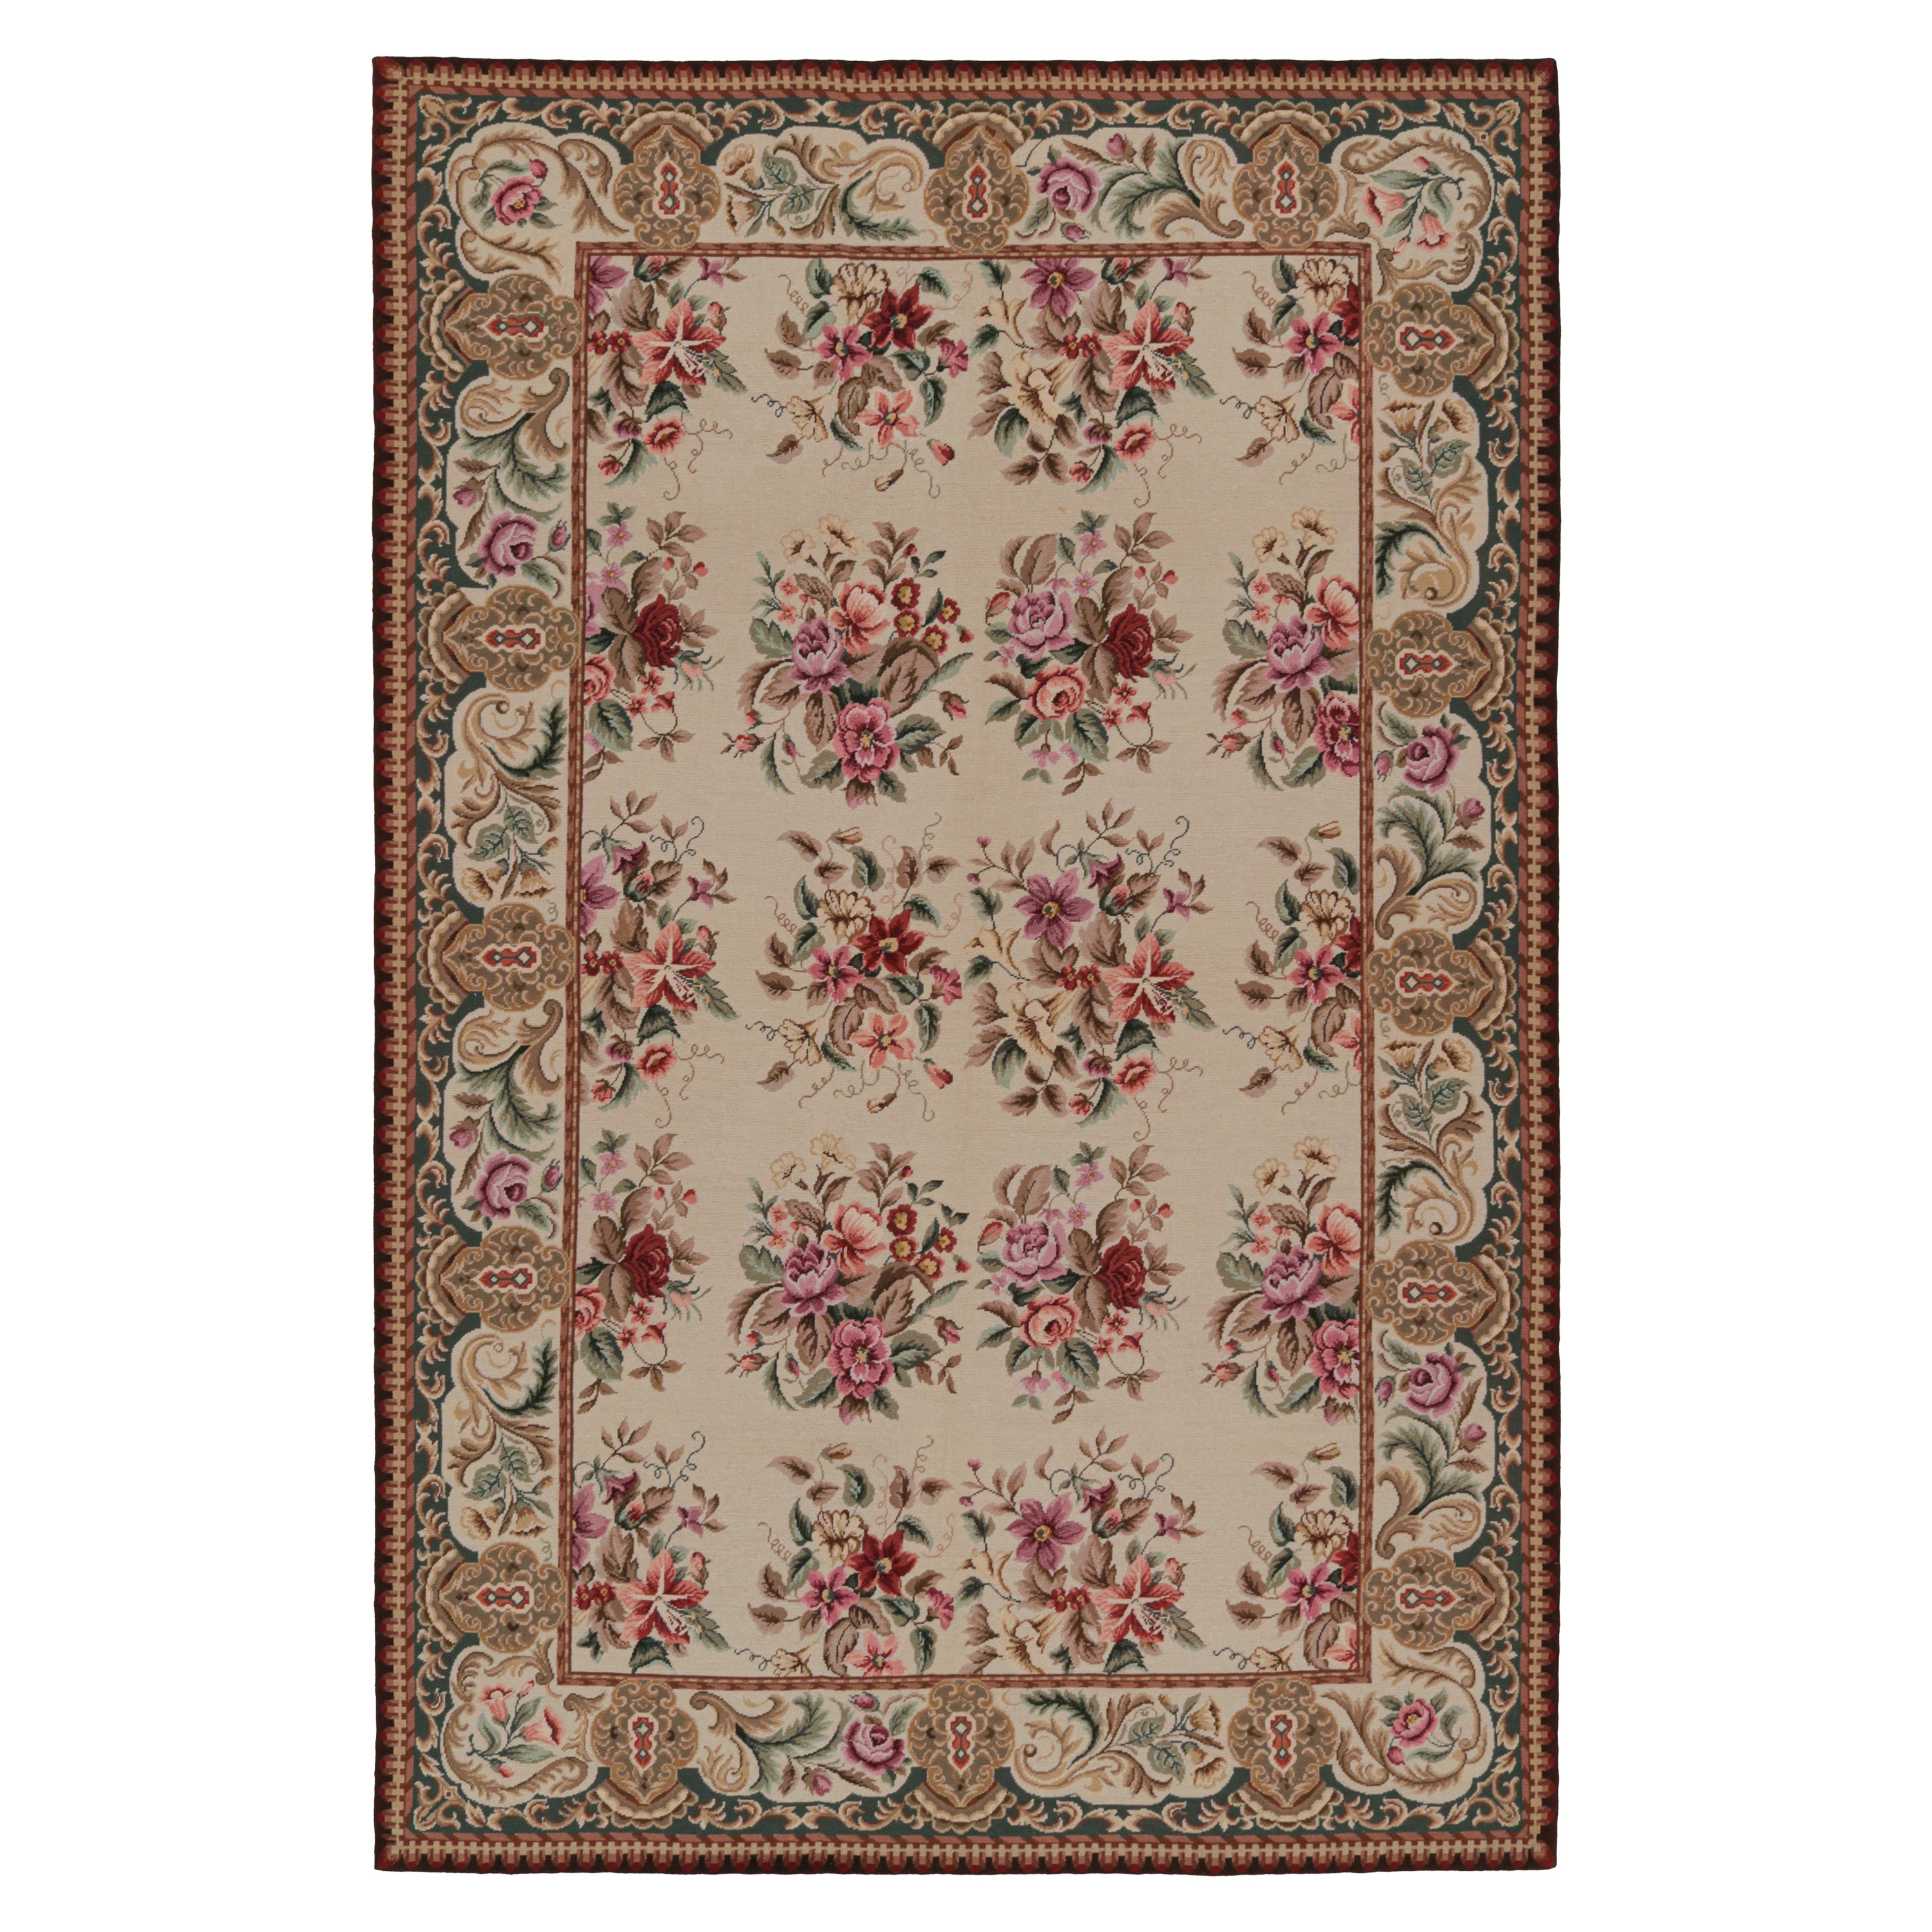 Rug & Kilim’s European Style Needlepoint Rug in Beige with Floral Patterns